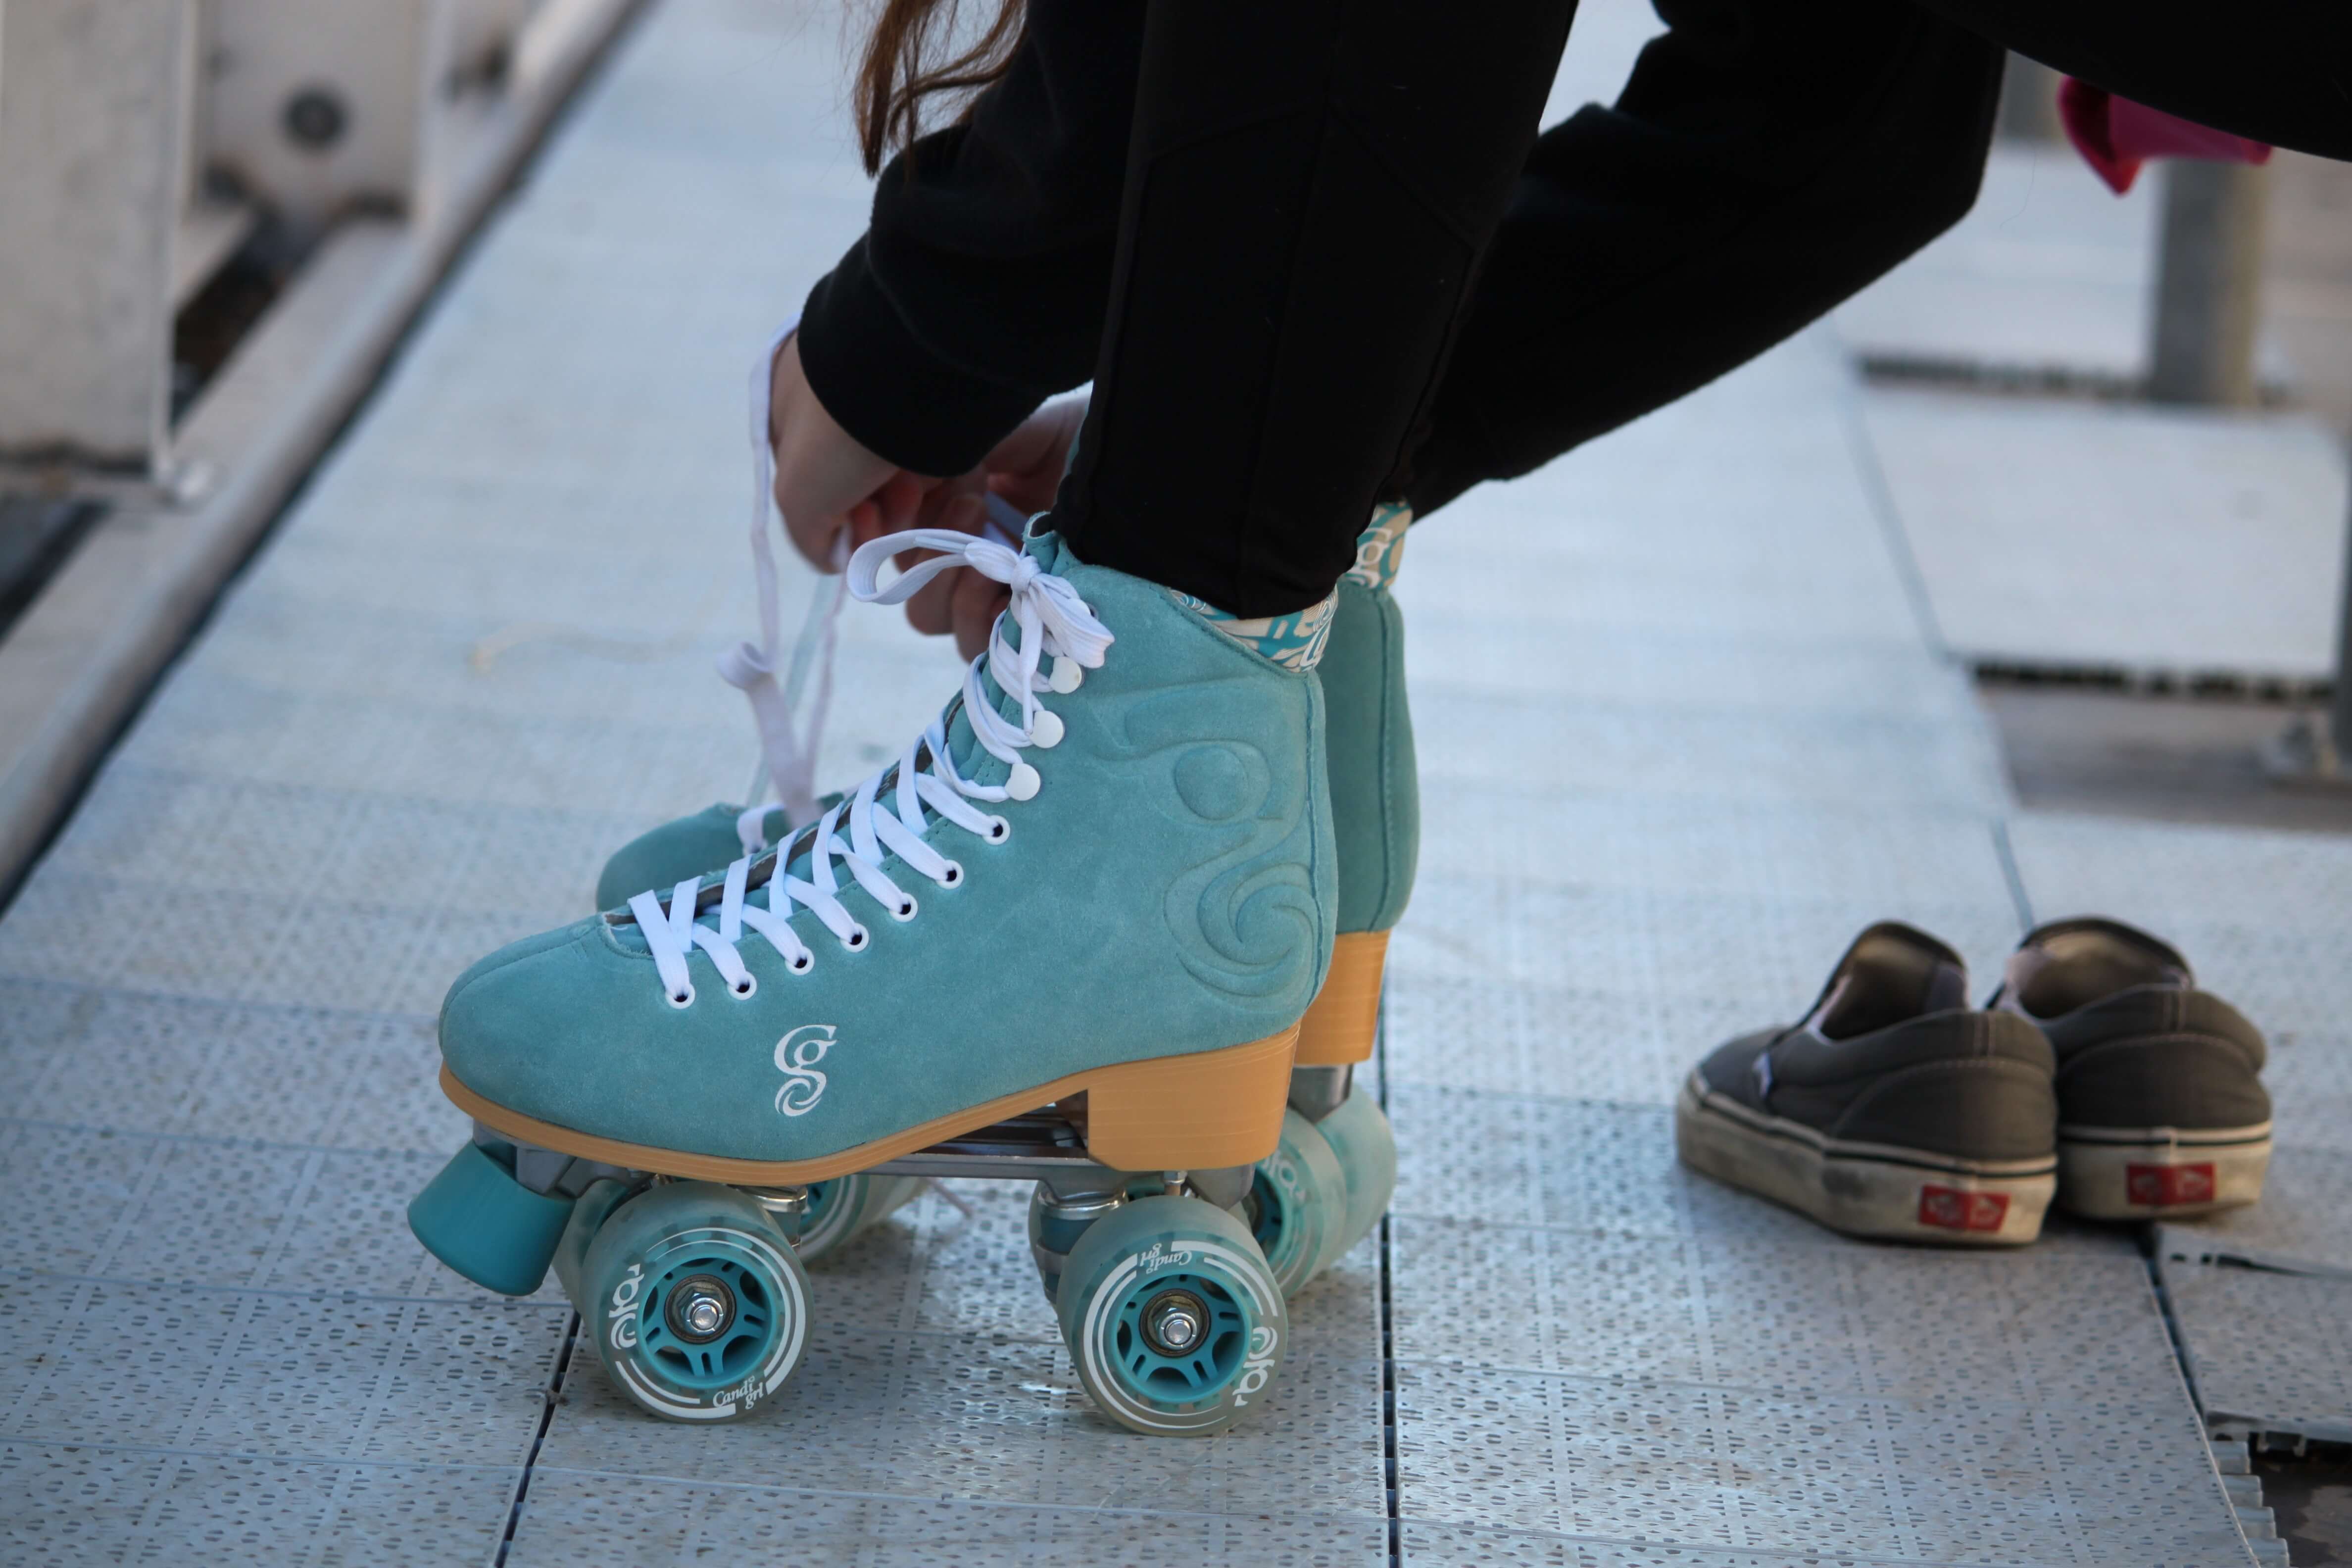 benefits of roller skating include health benefits